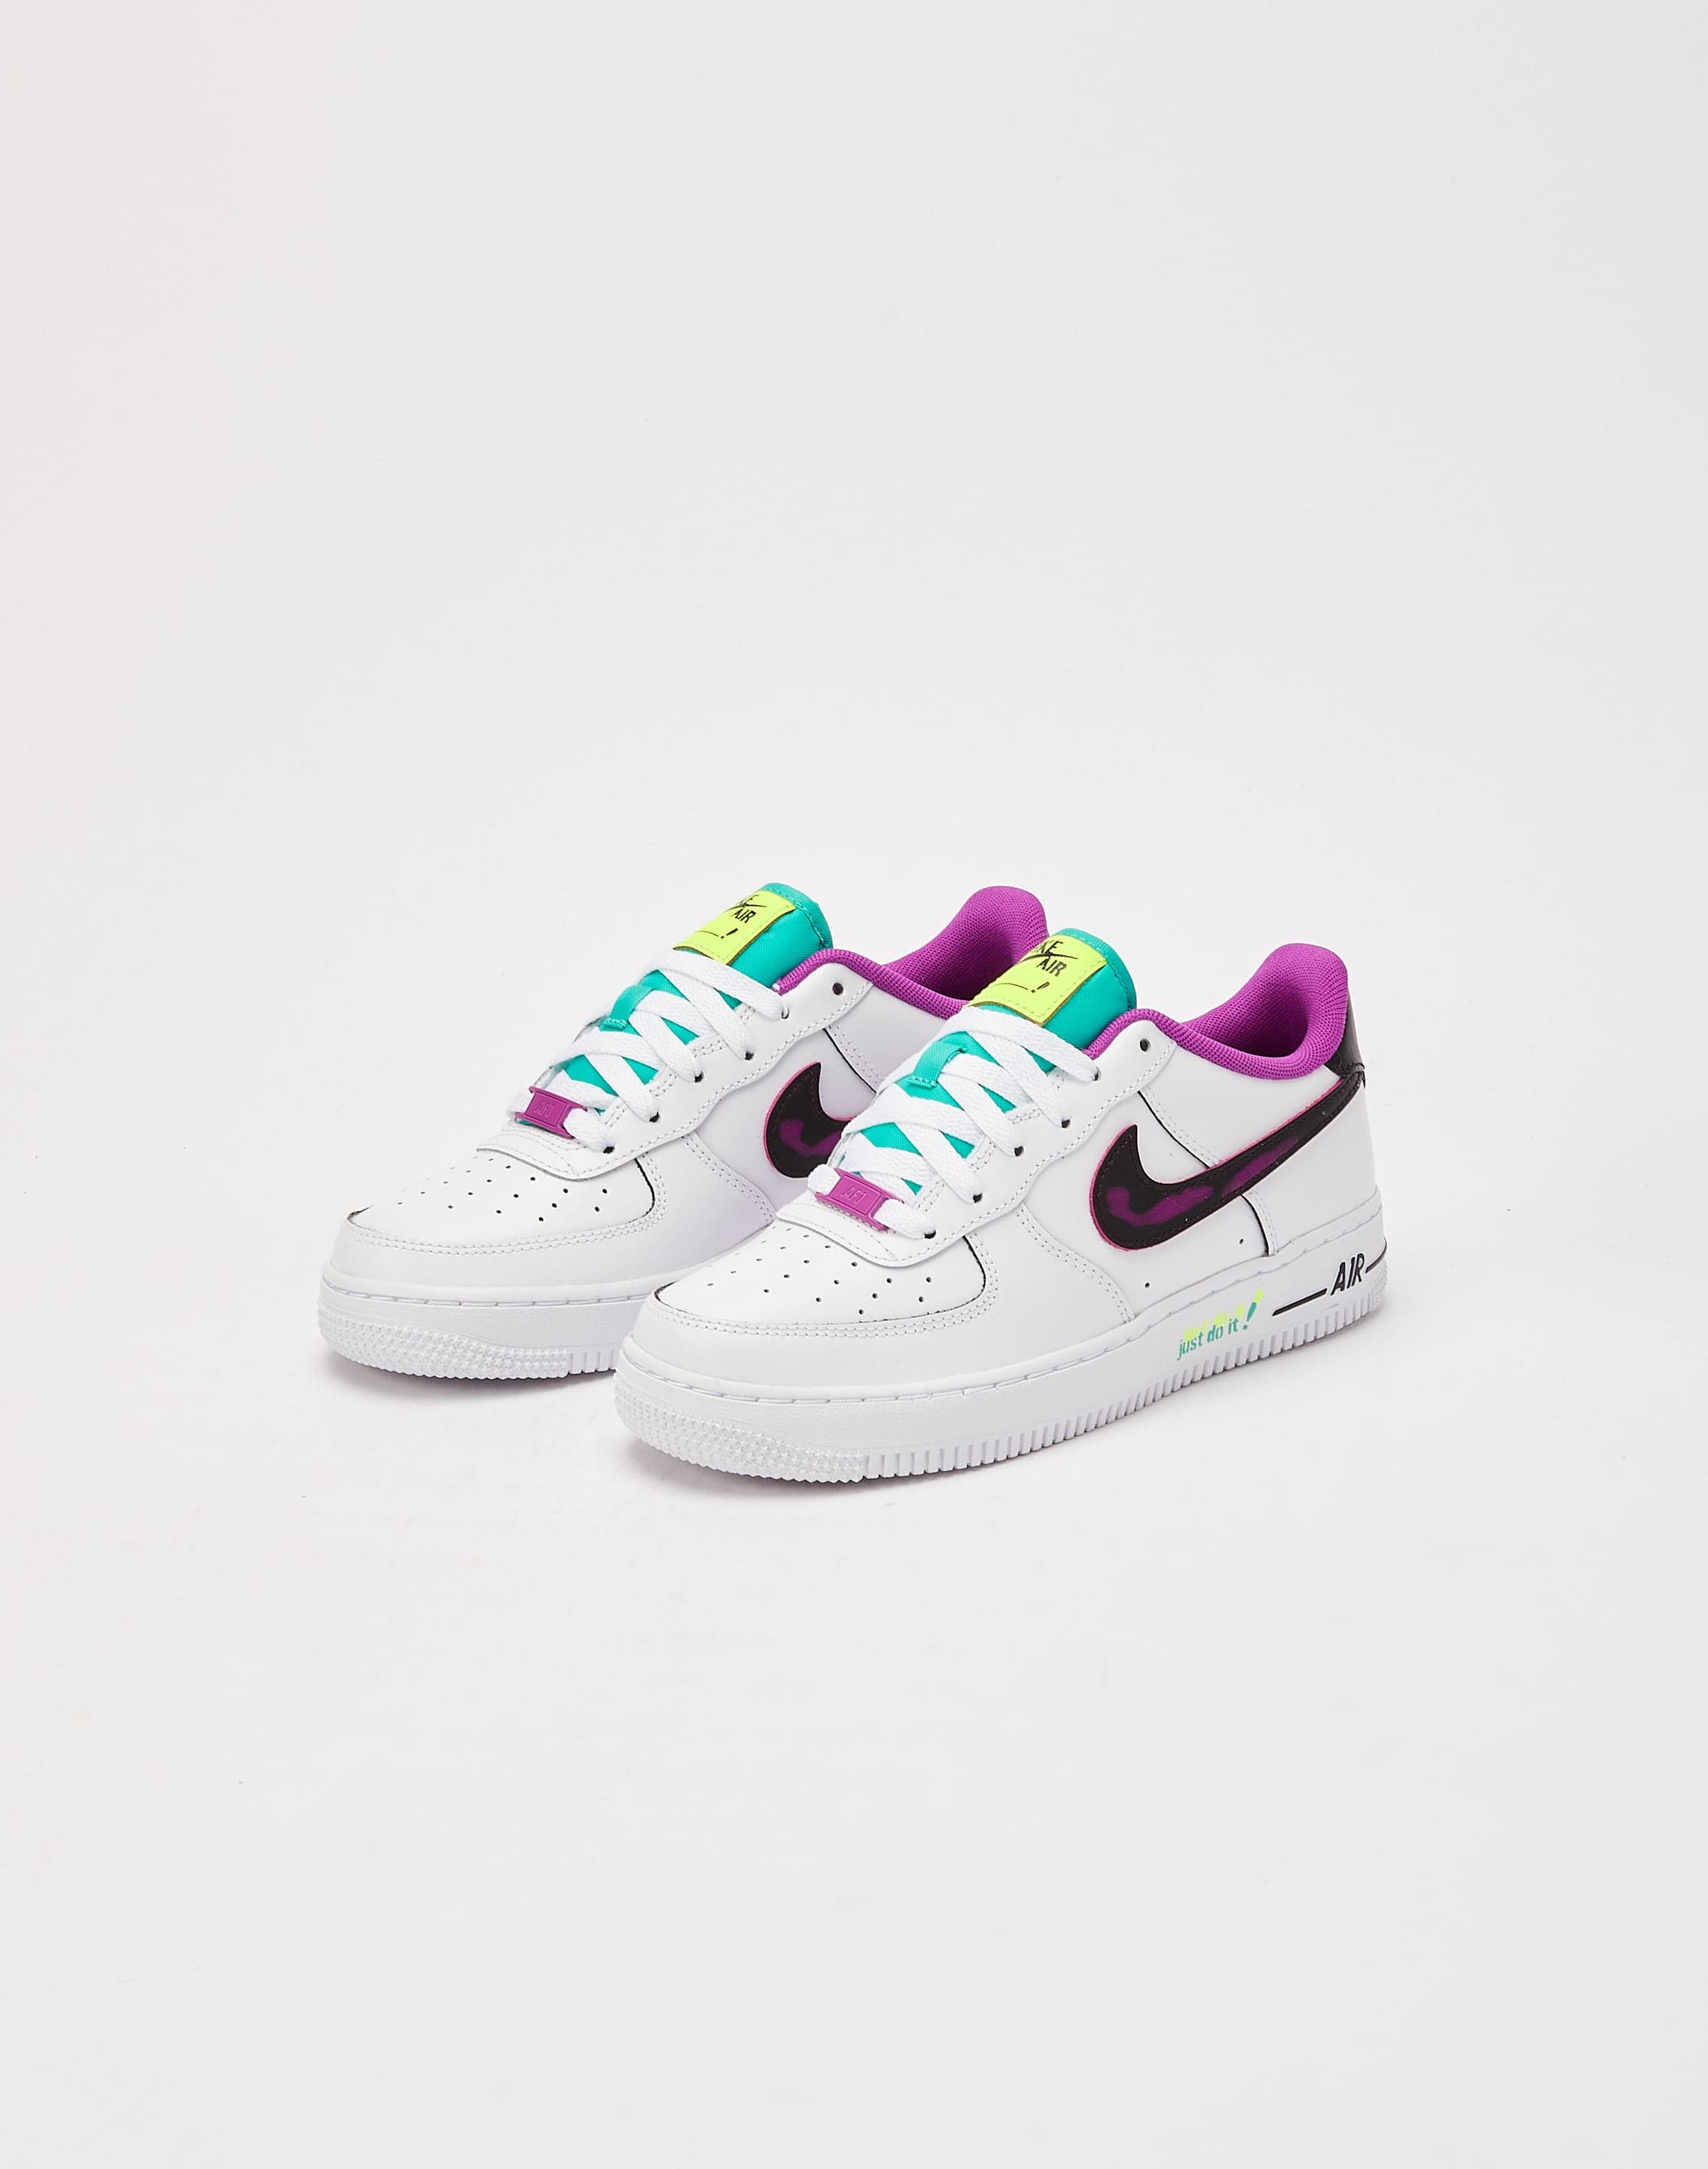 Nike Air Force 1 Low LV8 'Just Do It' Grade-School